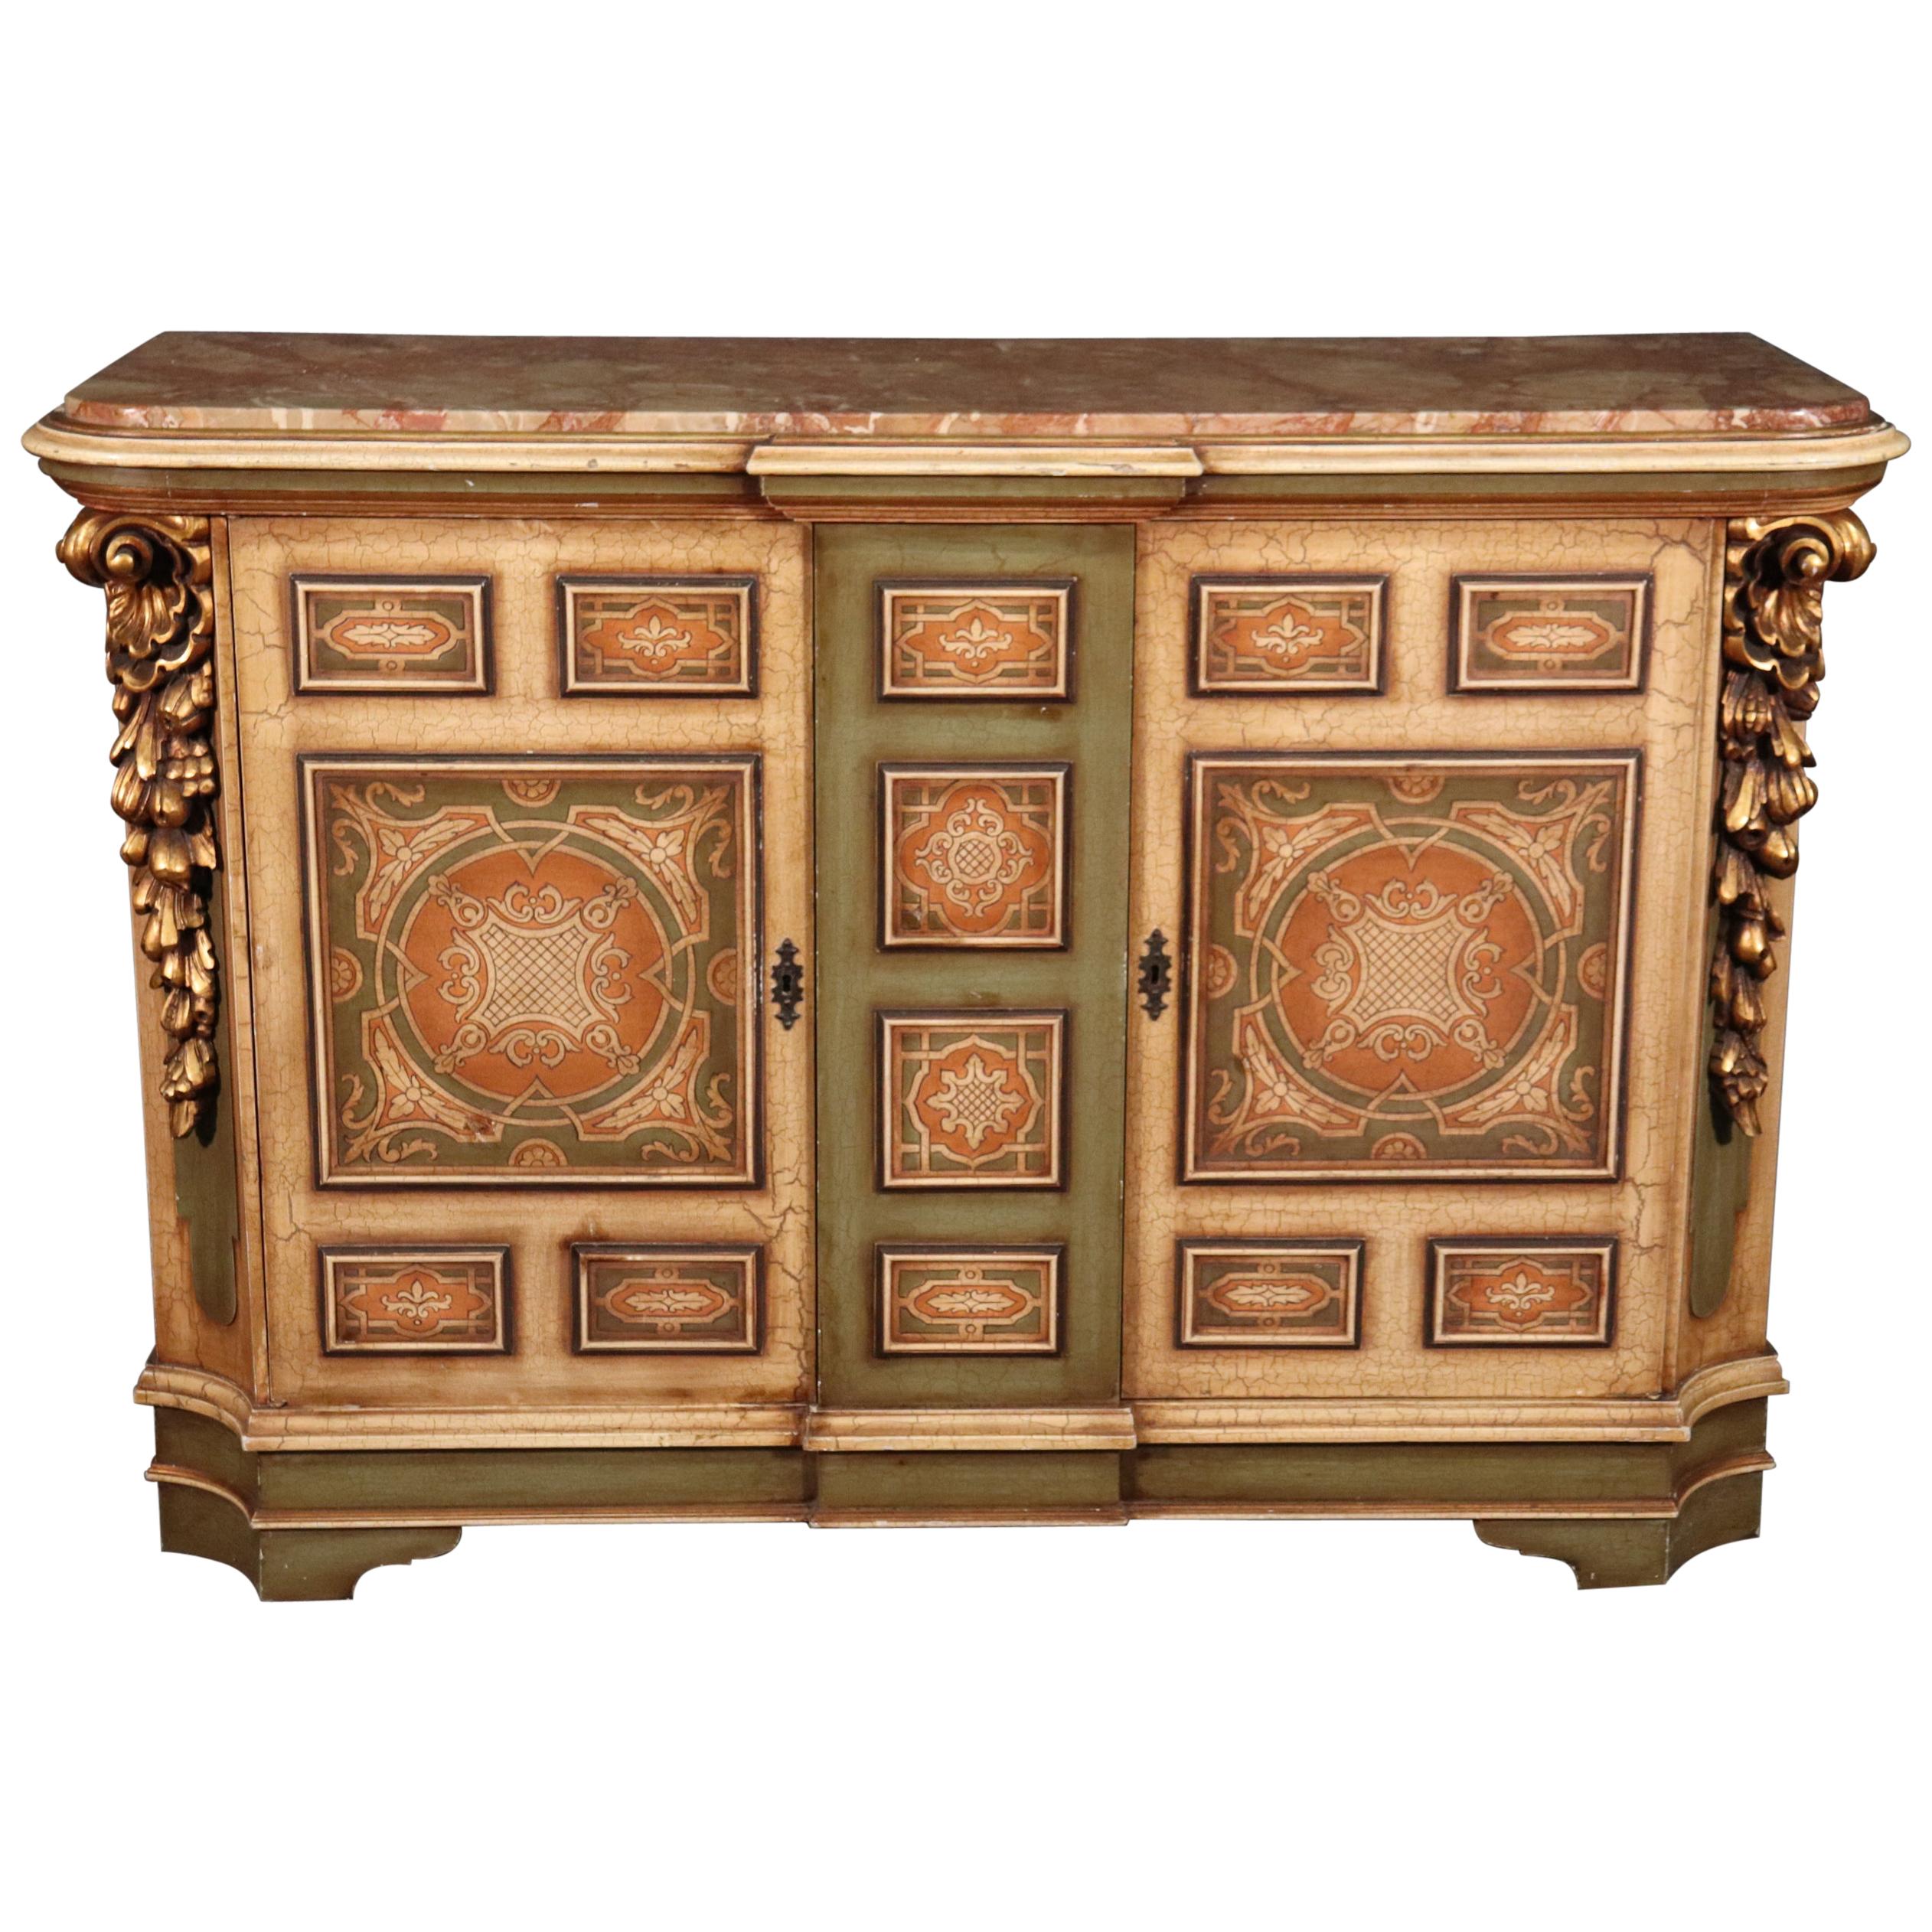 Unique Crackle Finished Gilded Marble Top Venetian Style Buffet Sideboard